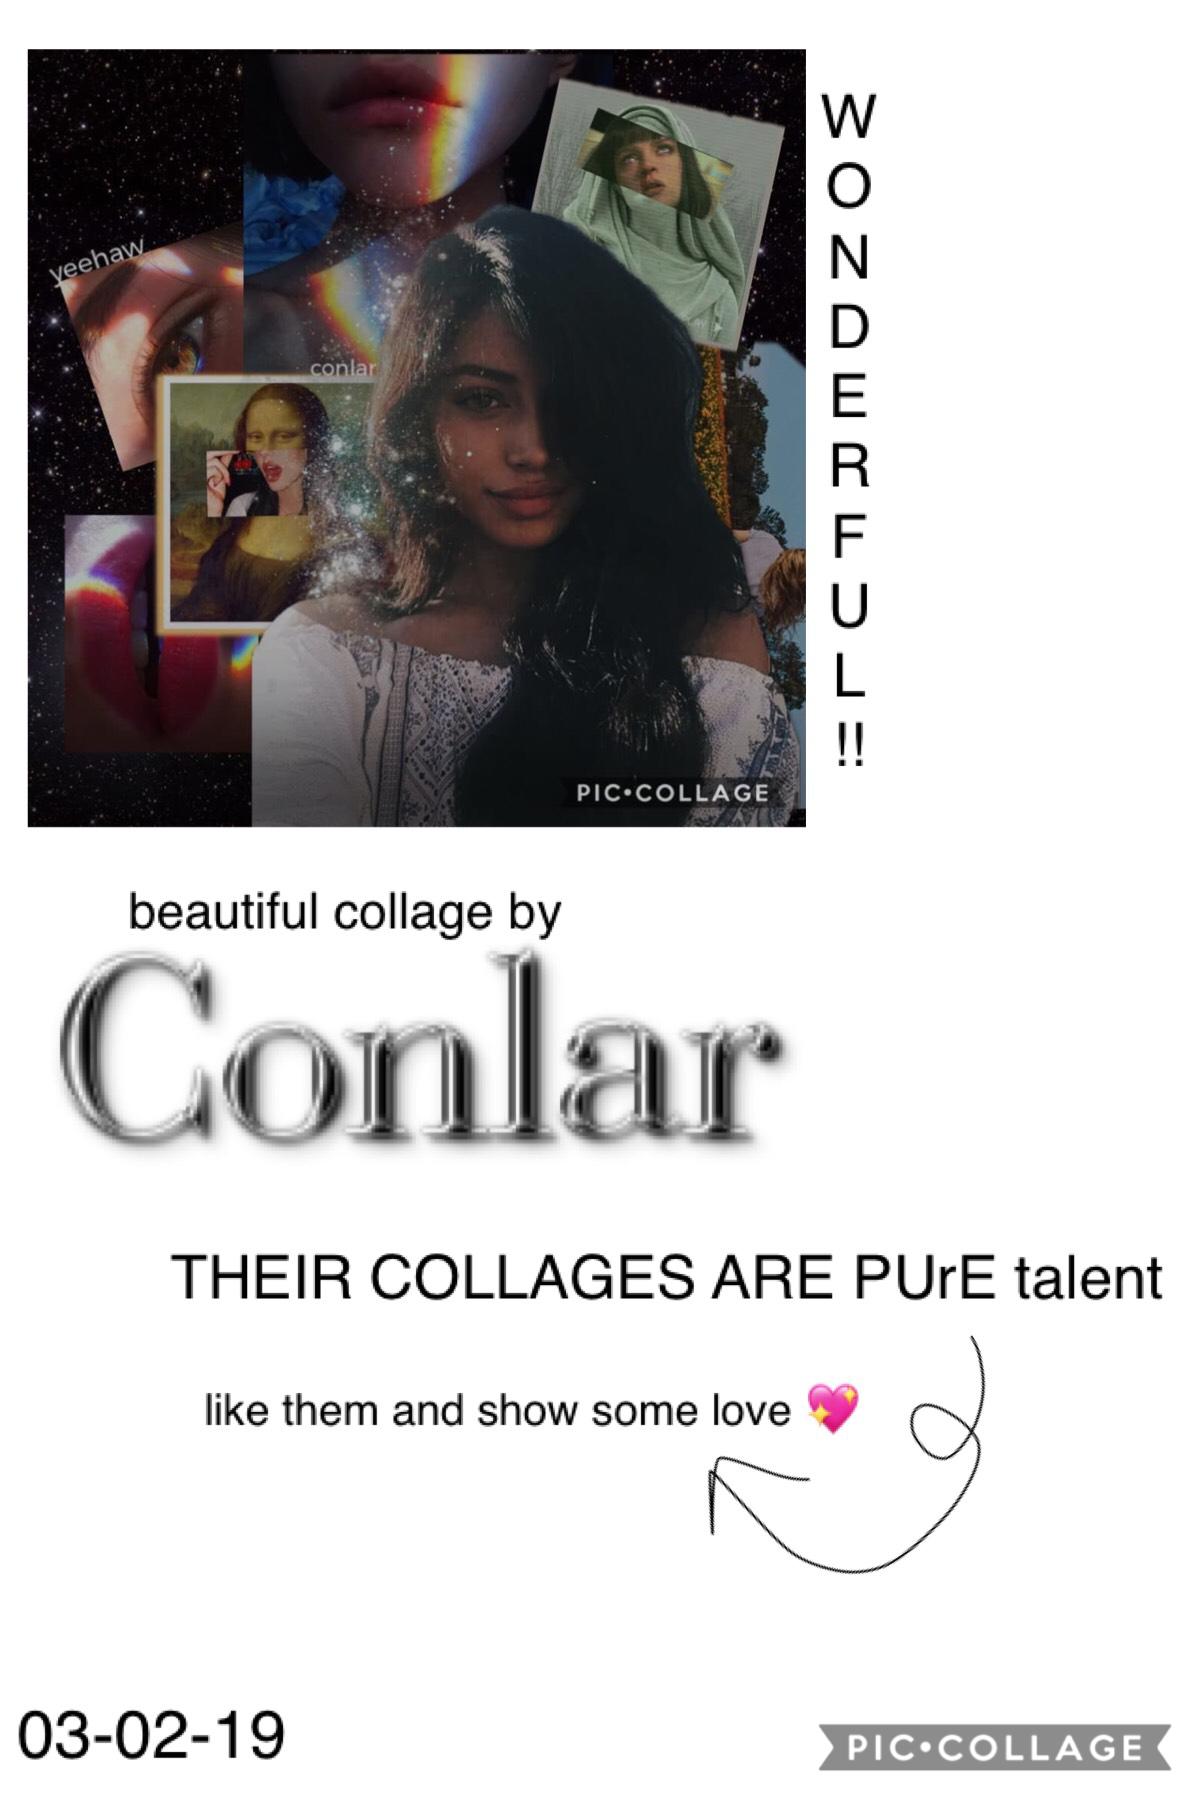 go follow ~ Conlar

OHMYGOODNESSES 100 BEAUTIFUL COLLAGERS THAT MAKE HUNDREDS OF BEAUTIFUL COLLAGES ARE VISITING THE GALLERY SSKSKSJJSKSJ